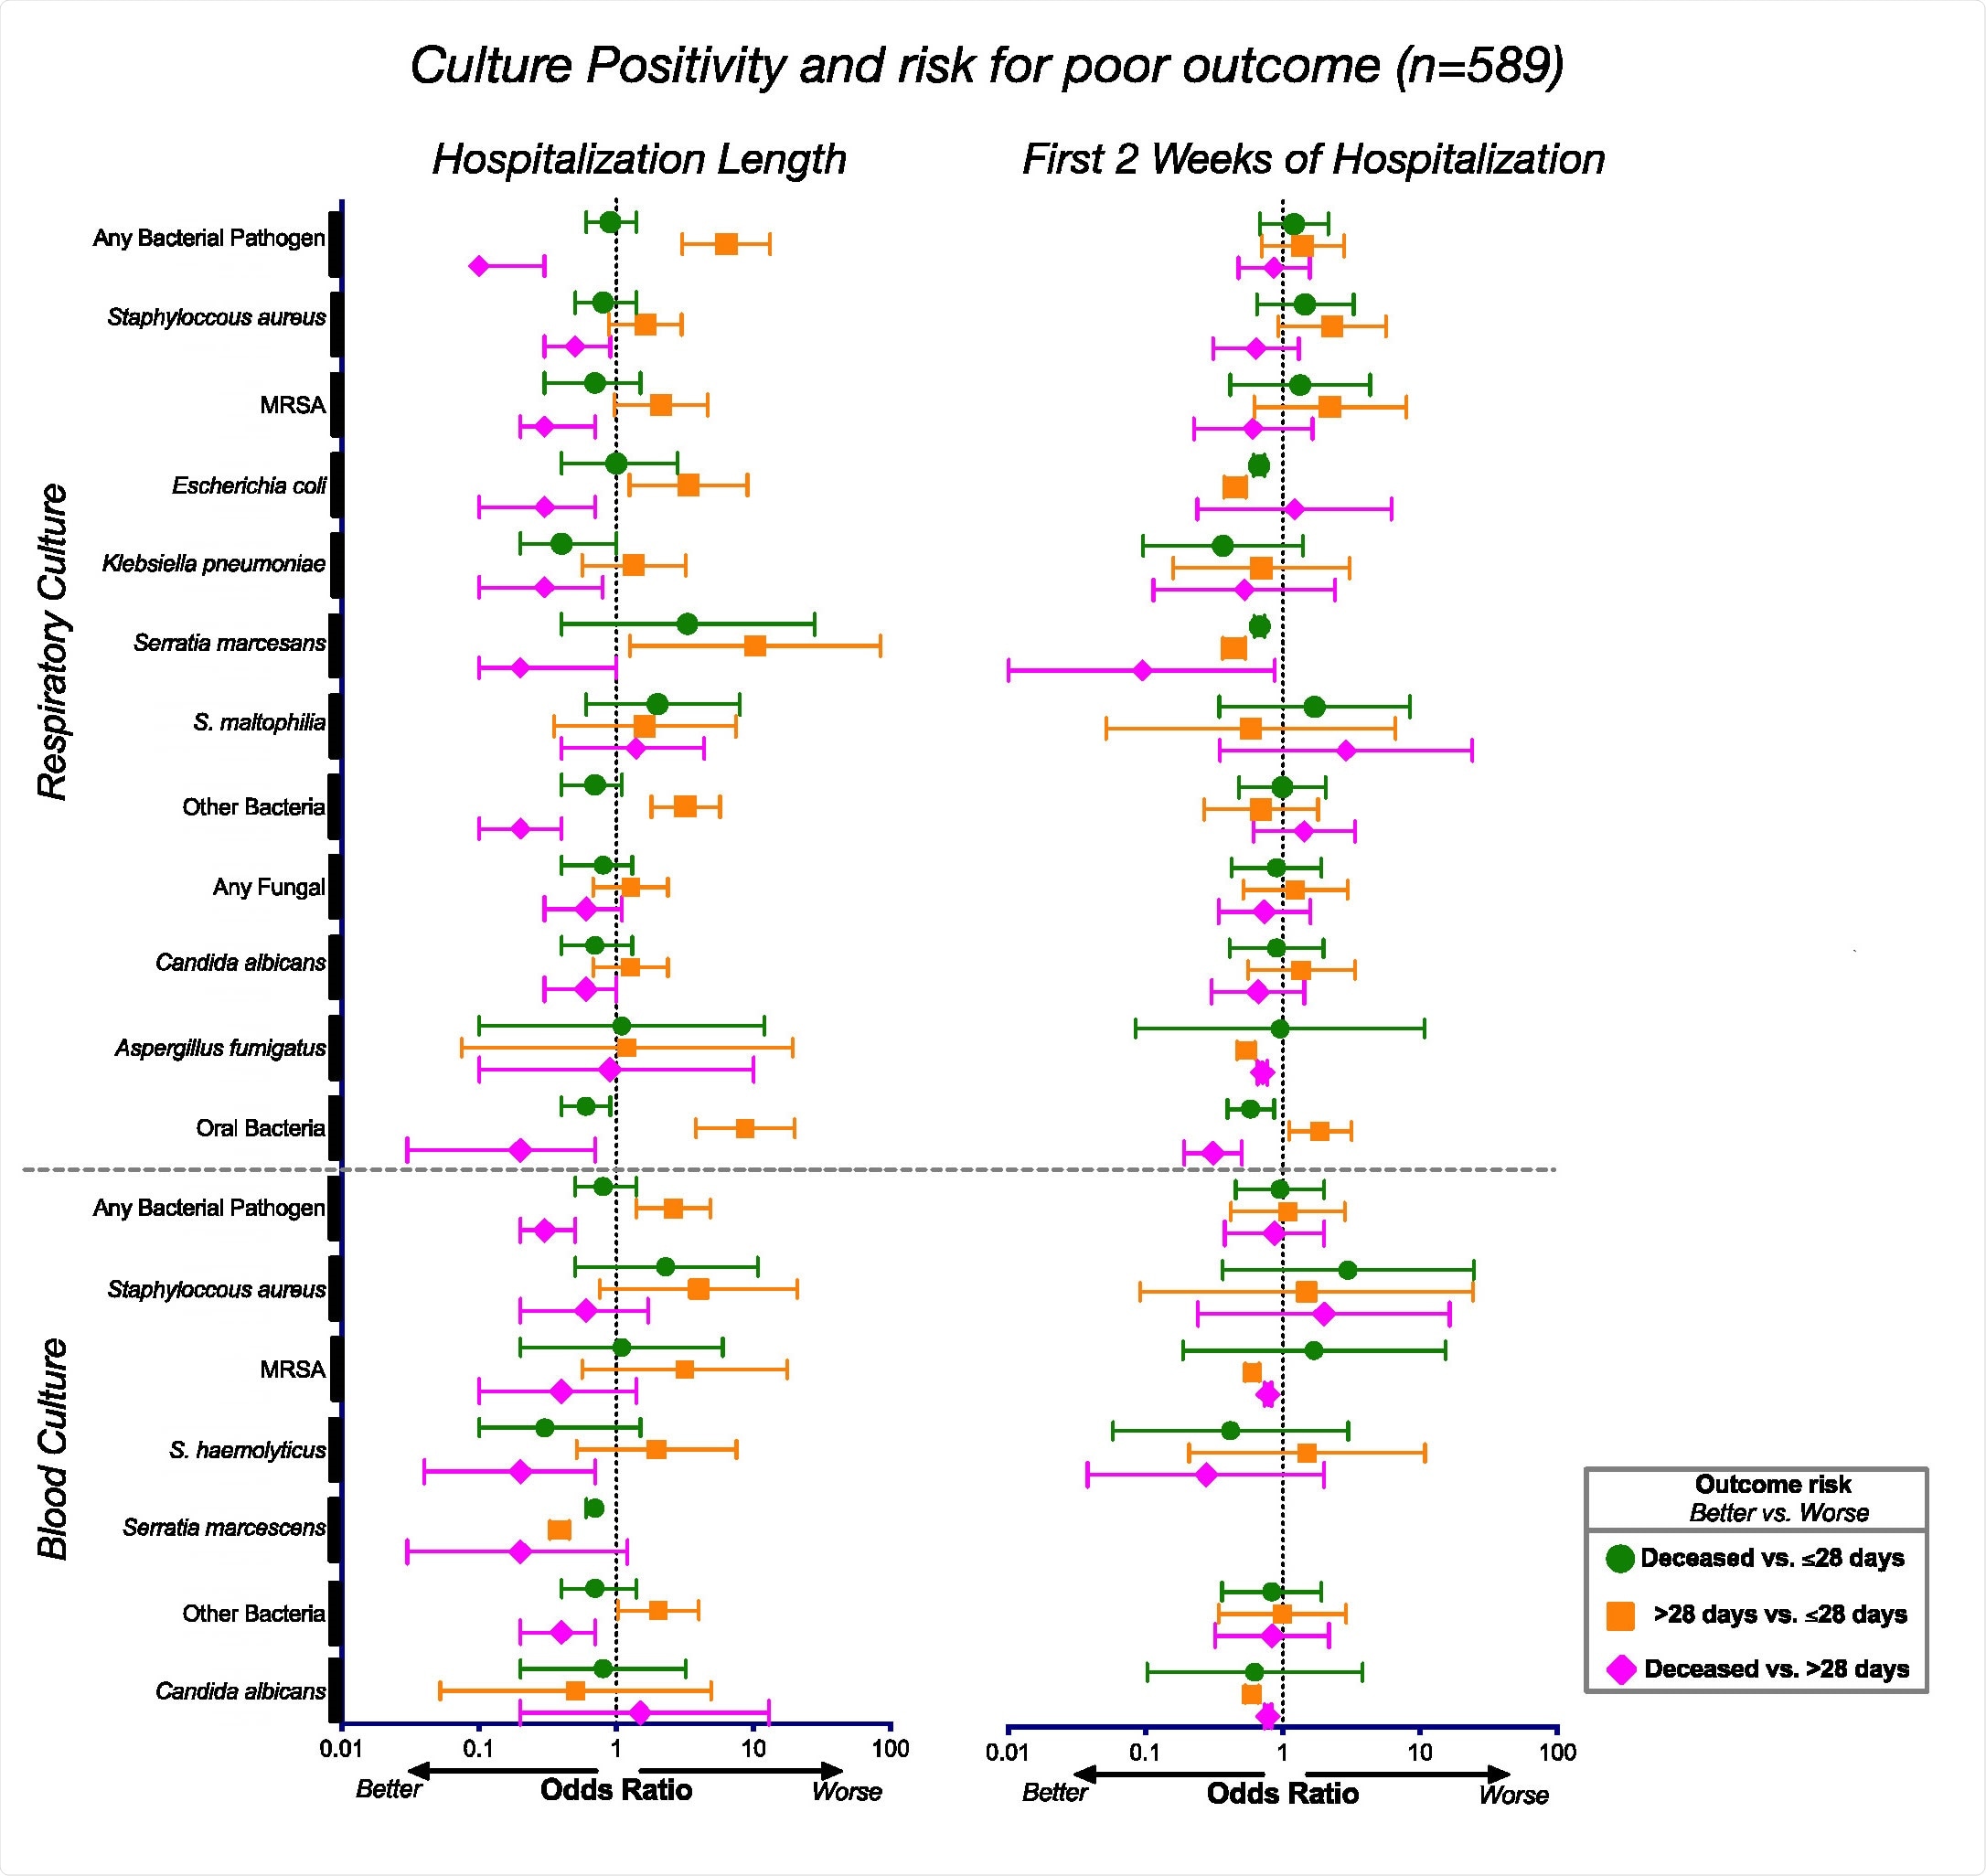 Associations between culture positivity and clinical outcome. Odds ratios and corresponding 95% confidence intervals for rates of culture positivity for the whole cohort (n=589) during the length of their hospitalization (left) and during the first 2 weeks of hospitalization (right).